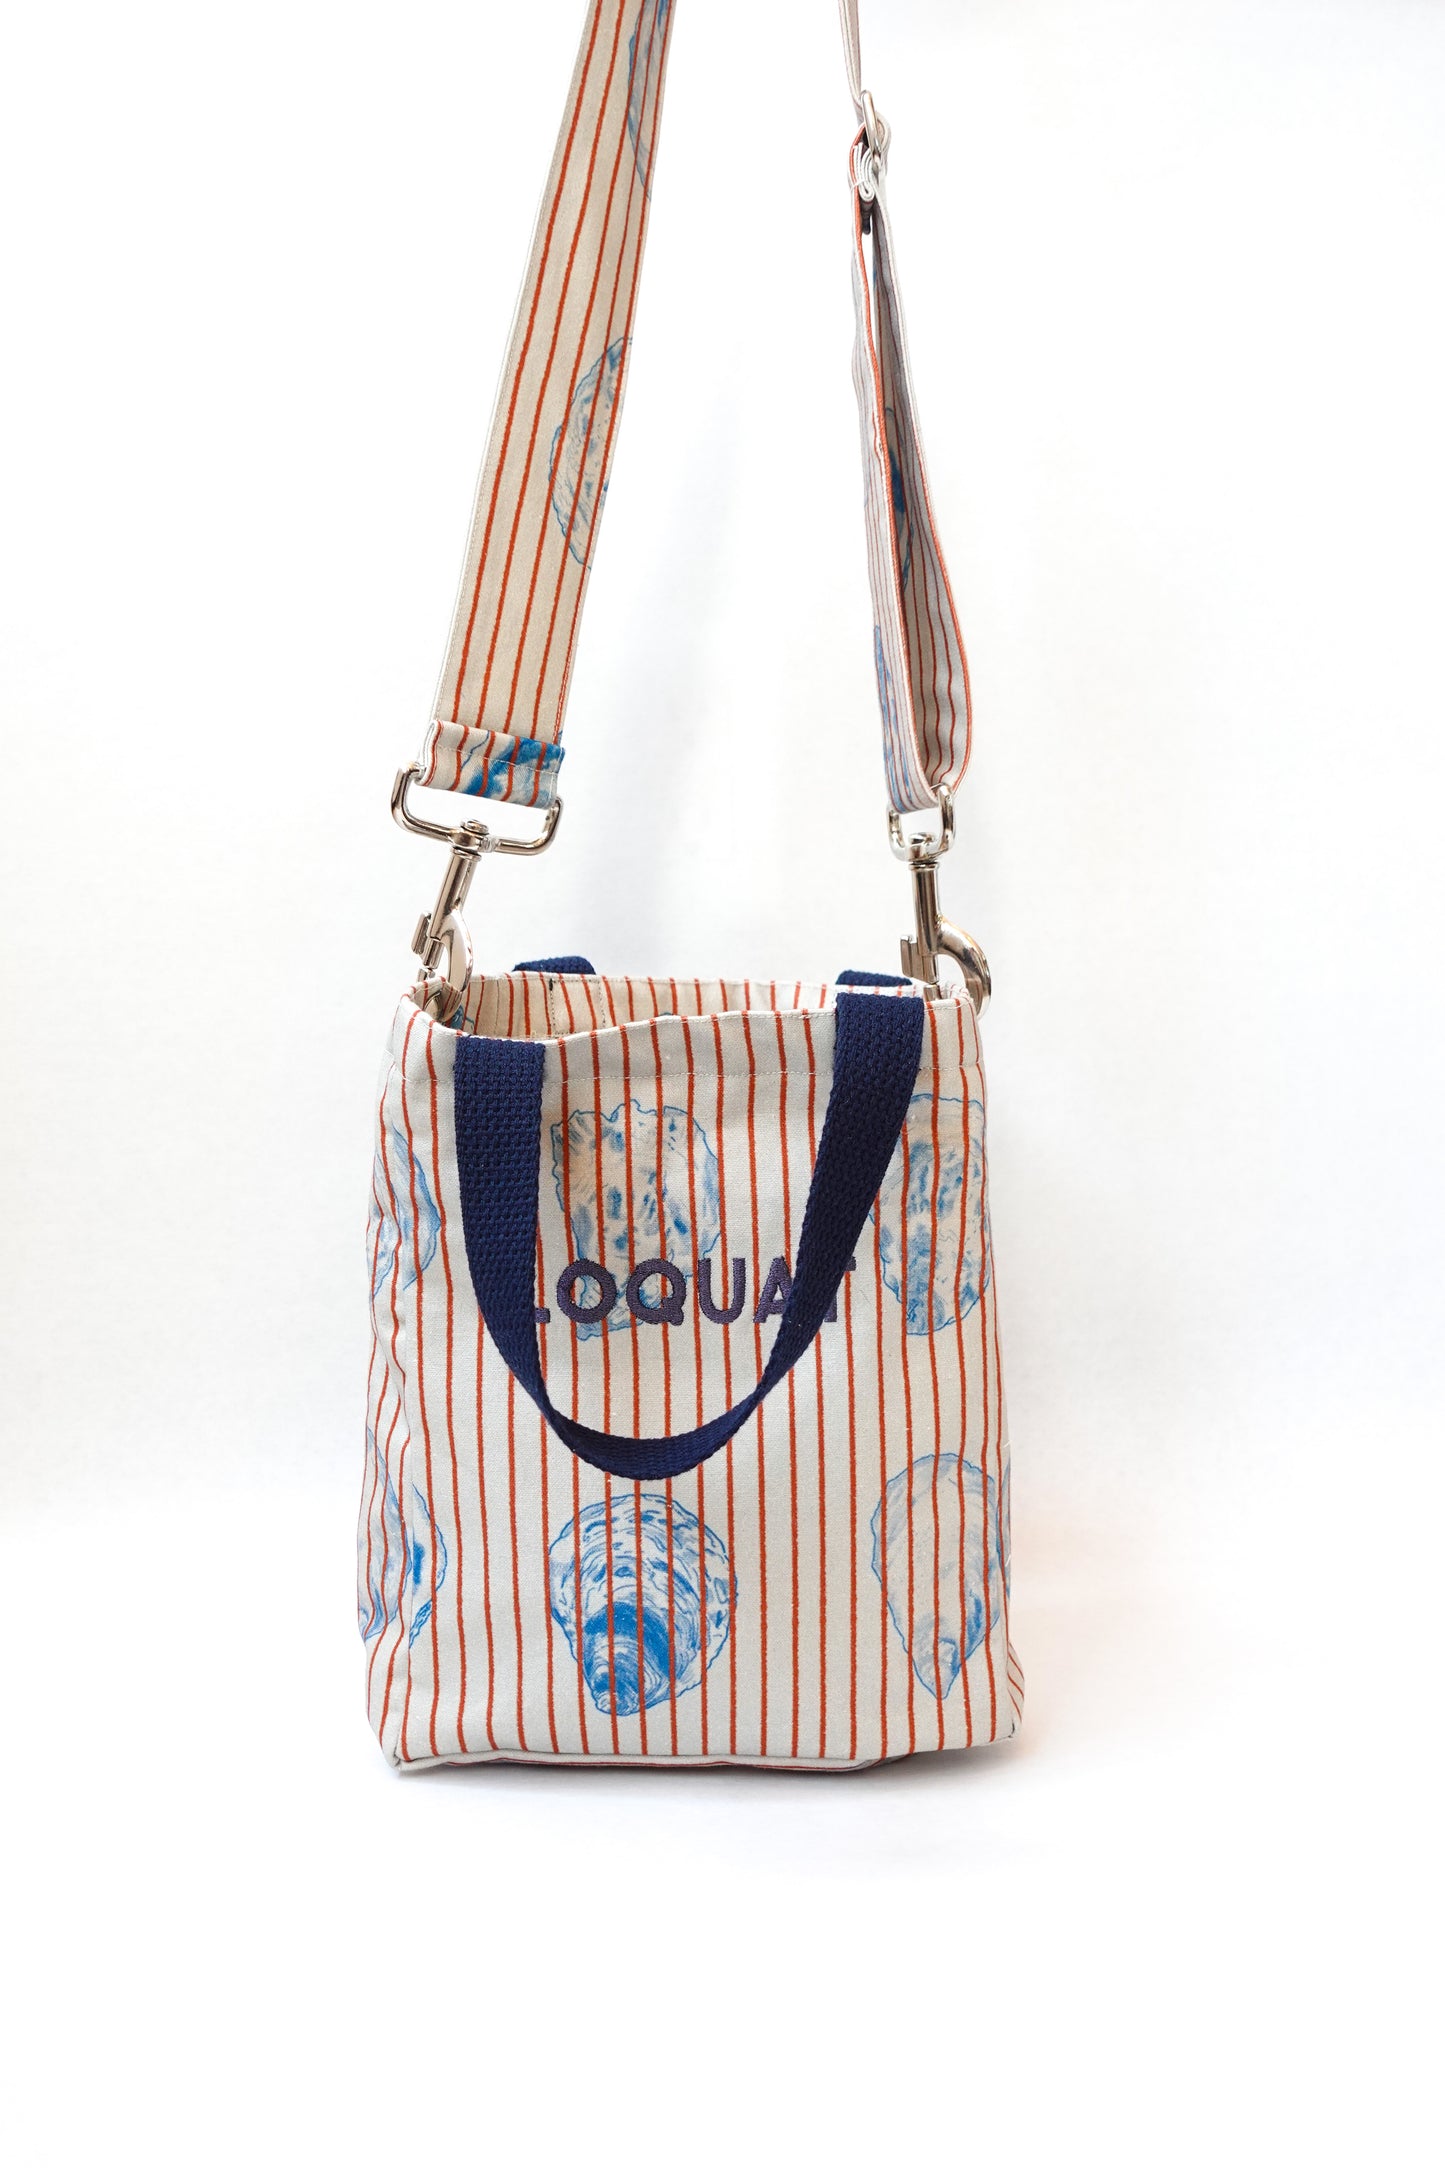 Oyster Tote Purse